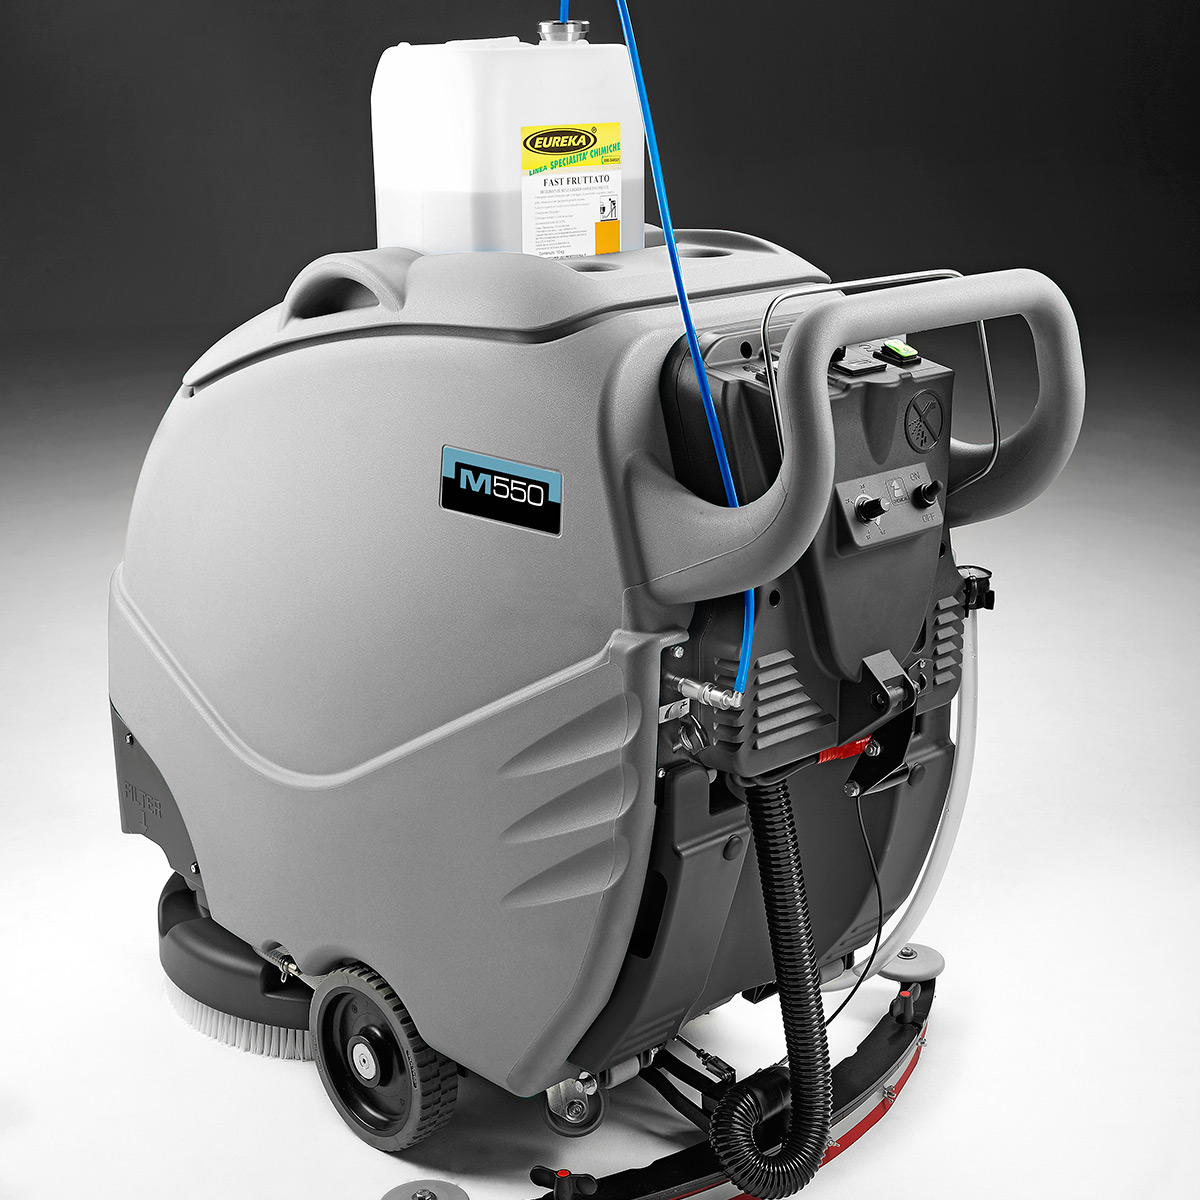 MACH M550 WALK BEHIND SCRUBBER WITH DOSE-MATIC SYSTEM